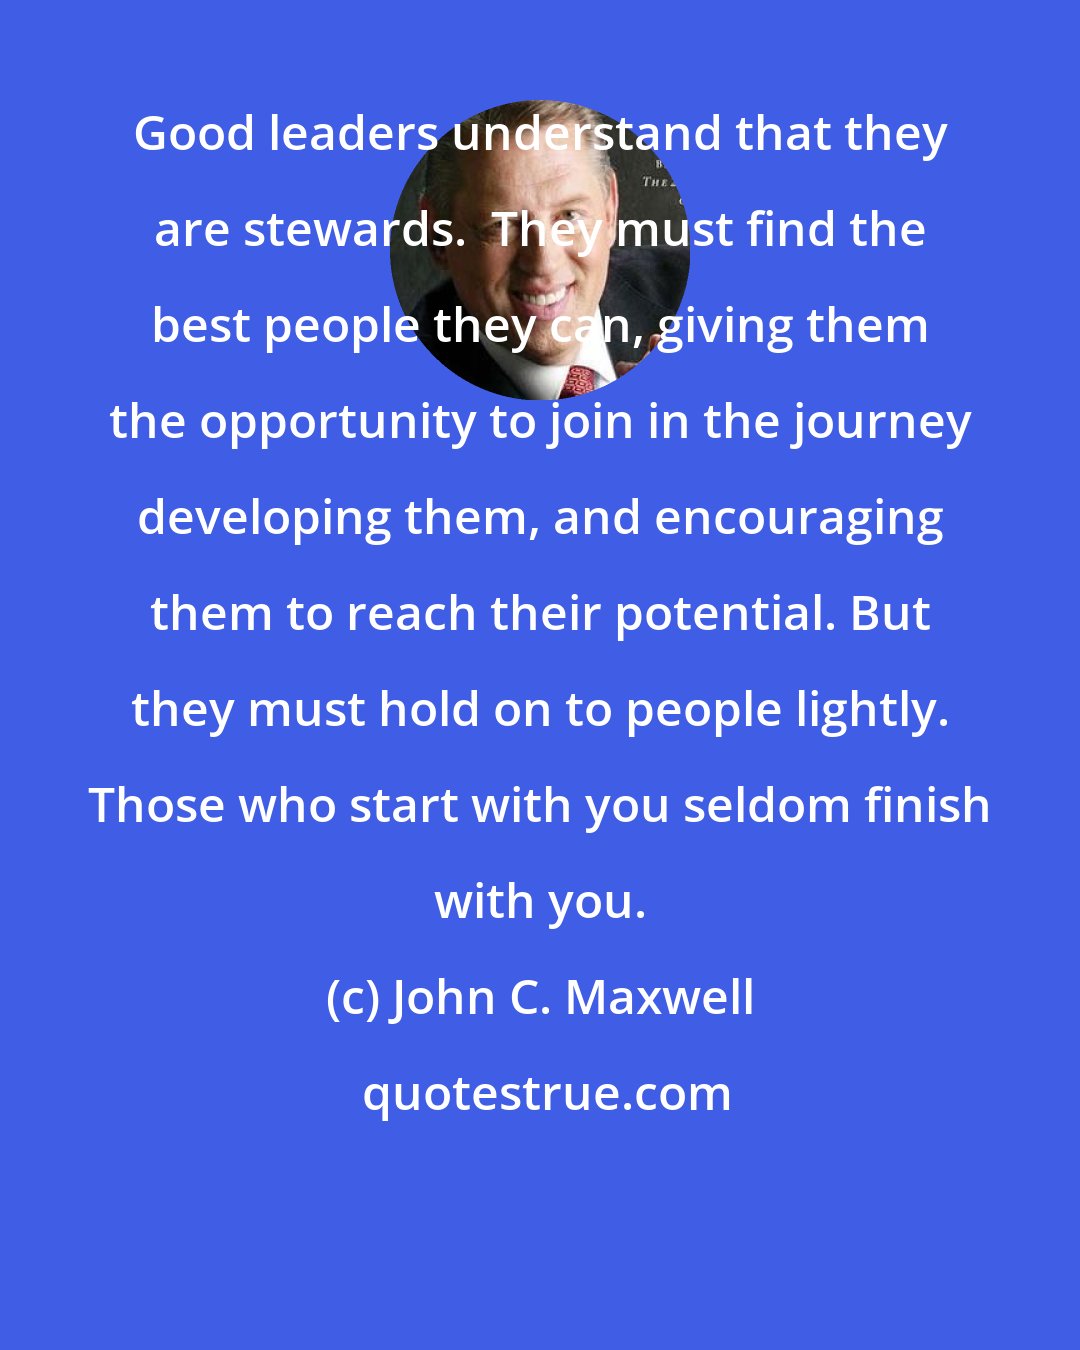 John C. Maxwell: Good leaders understand that they are stewards.  They must find the best people they can, giving them the opportunity to join in the journey developing them, and encouraging them to reach their potential. But they must hold on to people lightly. Those who start with you seldom finish with you.